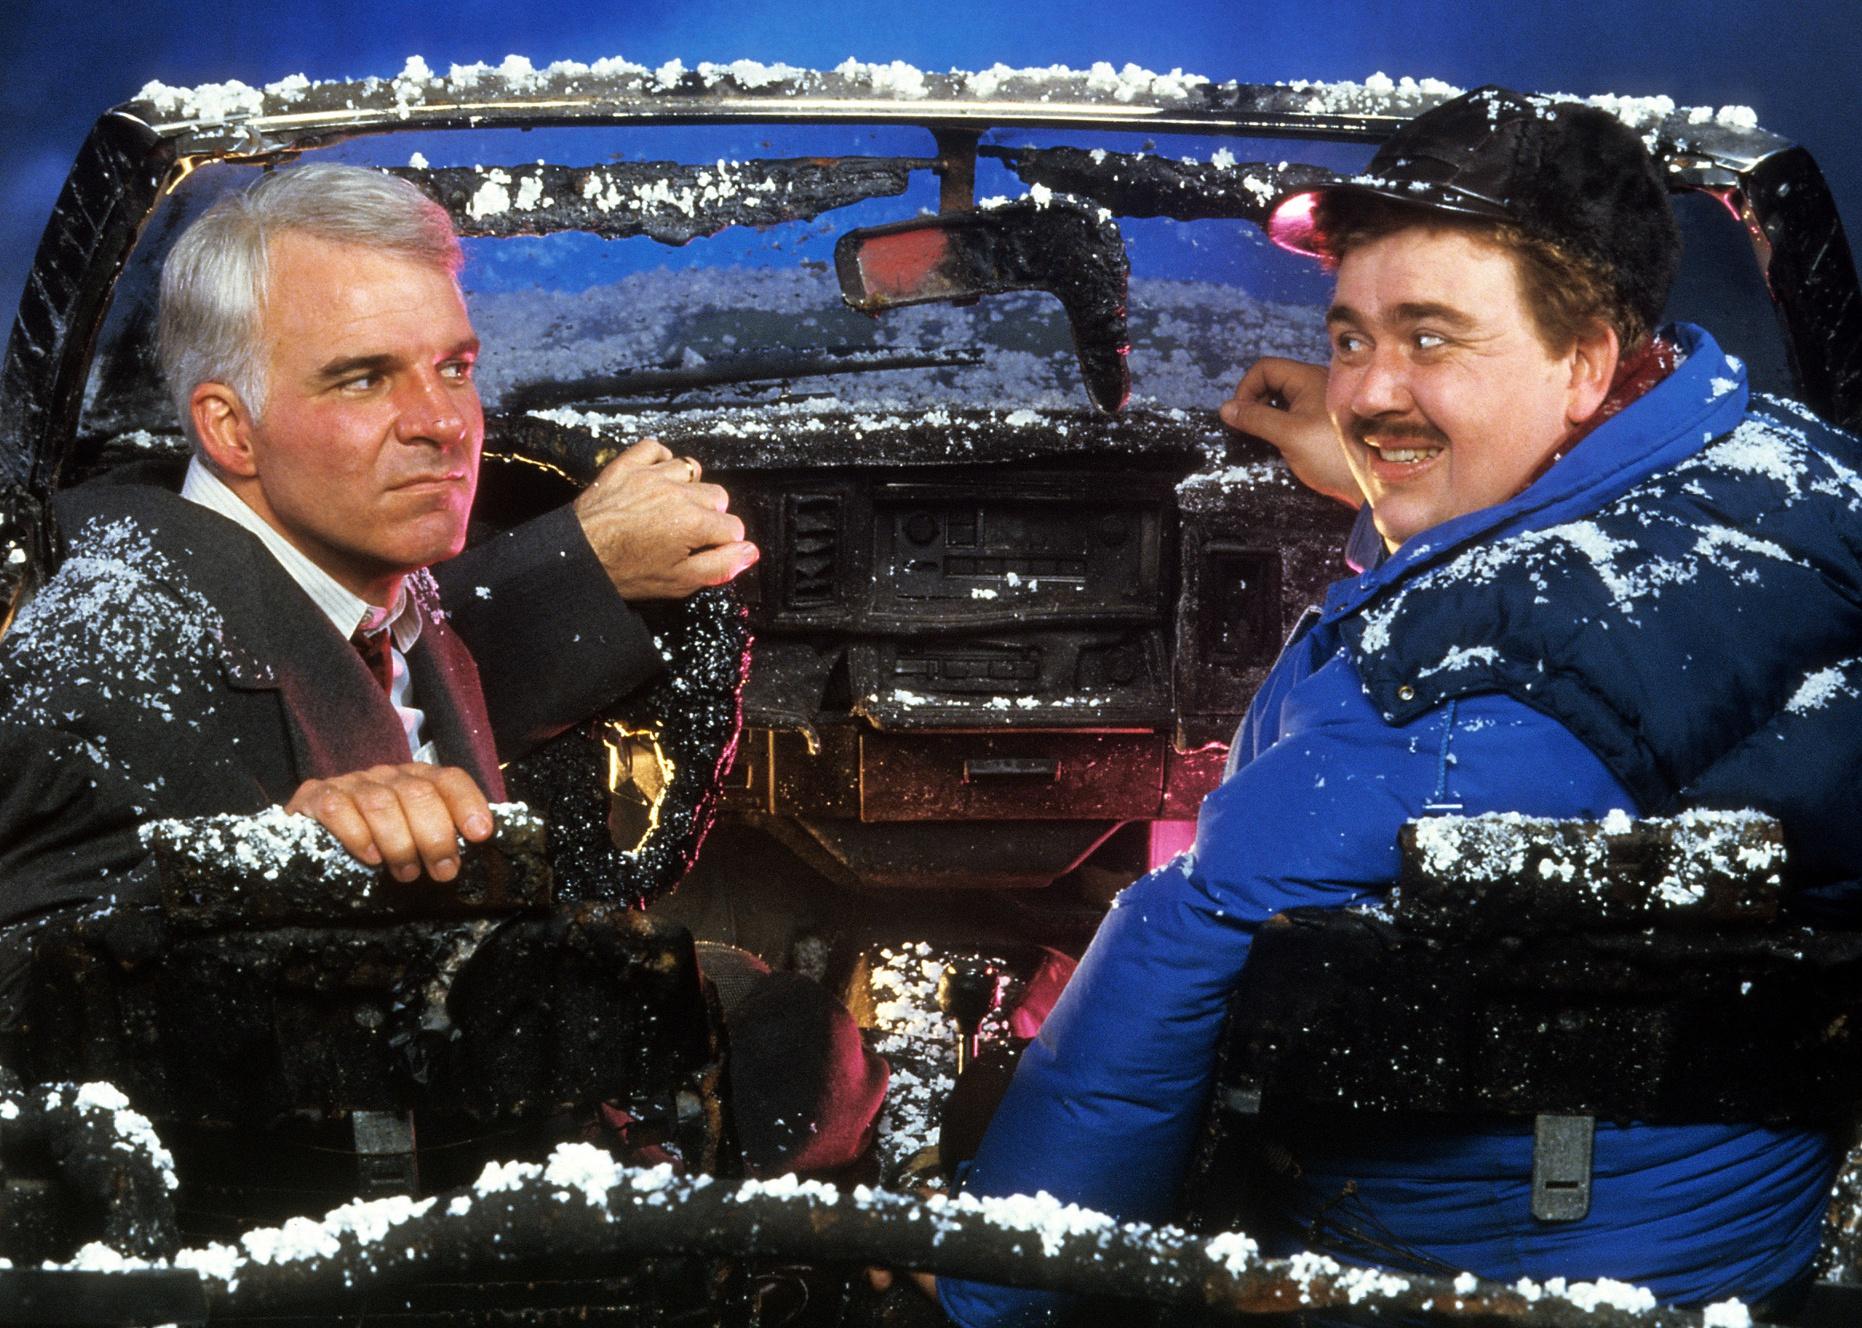 Steve Martin and John Candy in a completely destroyed convertible car looking at each other.